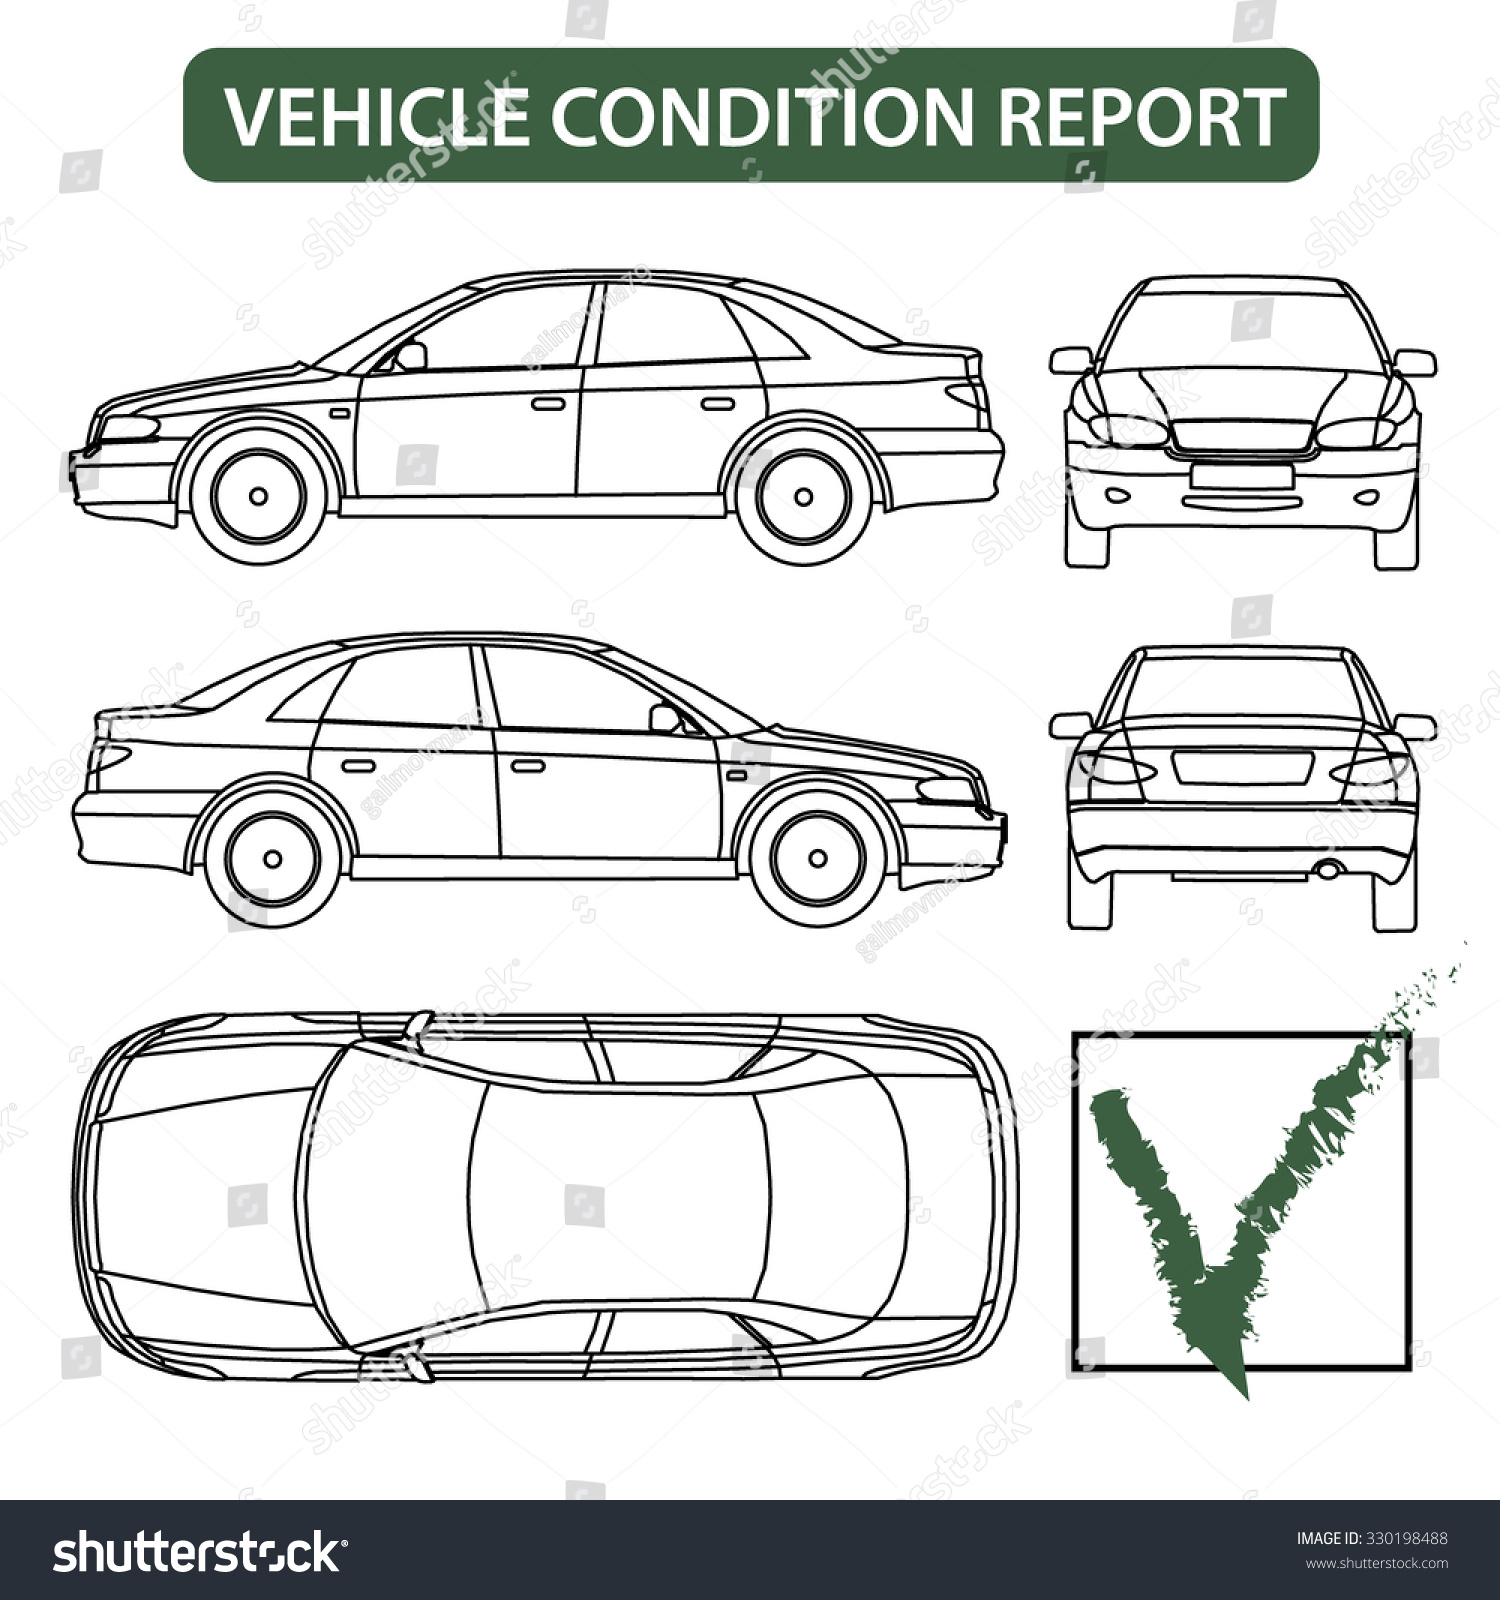 Car Condition Form Vehicle Checklist Auto Stock Vector (Royalty With Regard To Truck Condition Report Template